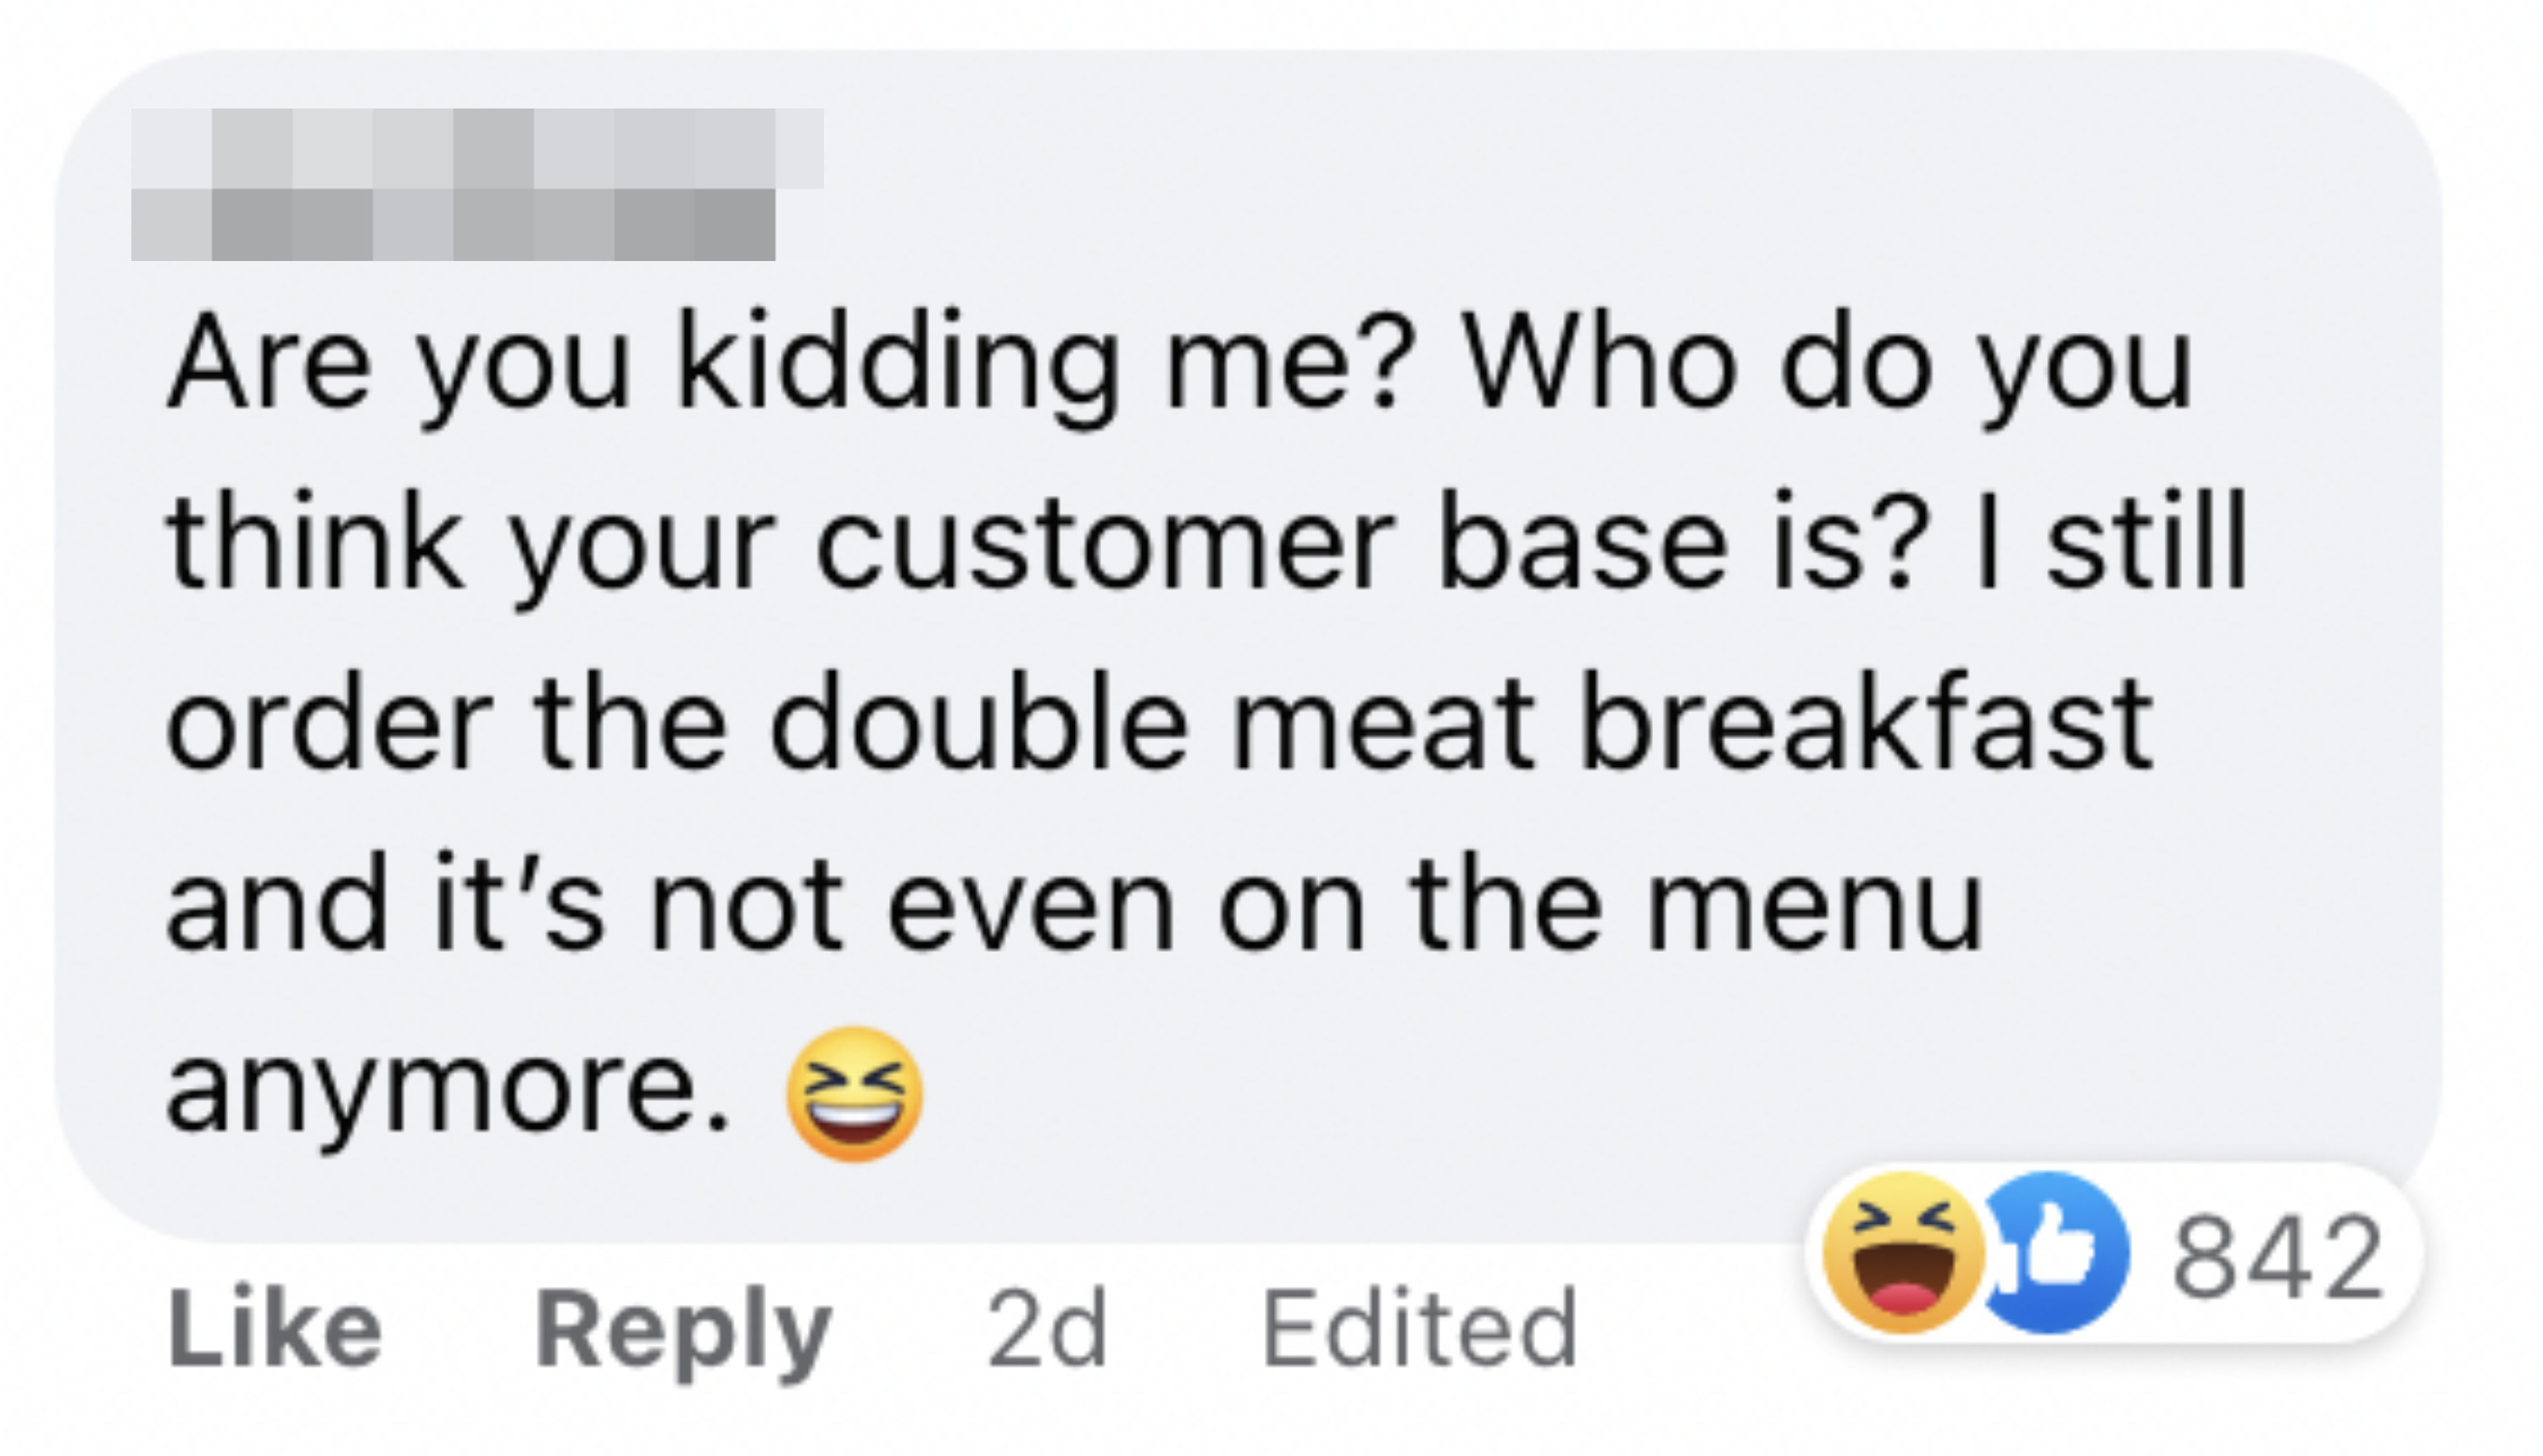 One person said &quot;Are you kidding me? Who do you think your customer base is? I still order the double meat breakfast and it&#x27;s not event on the menu anymore&quot;